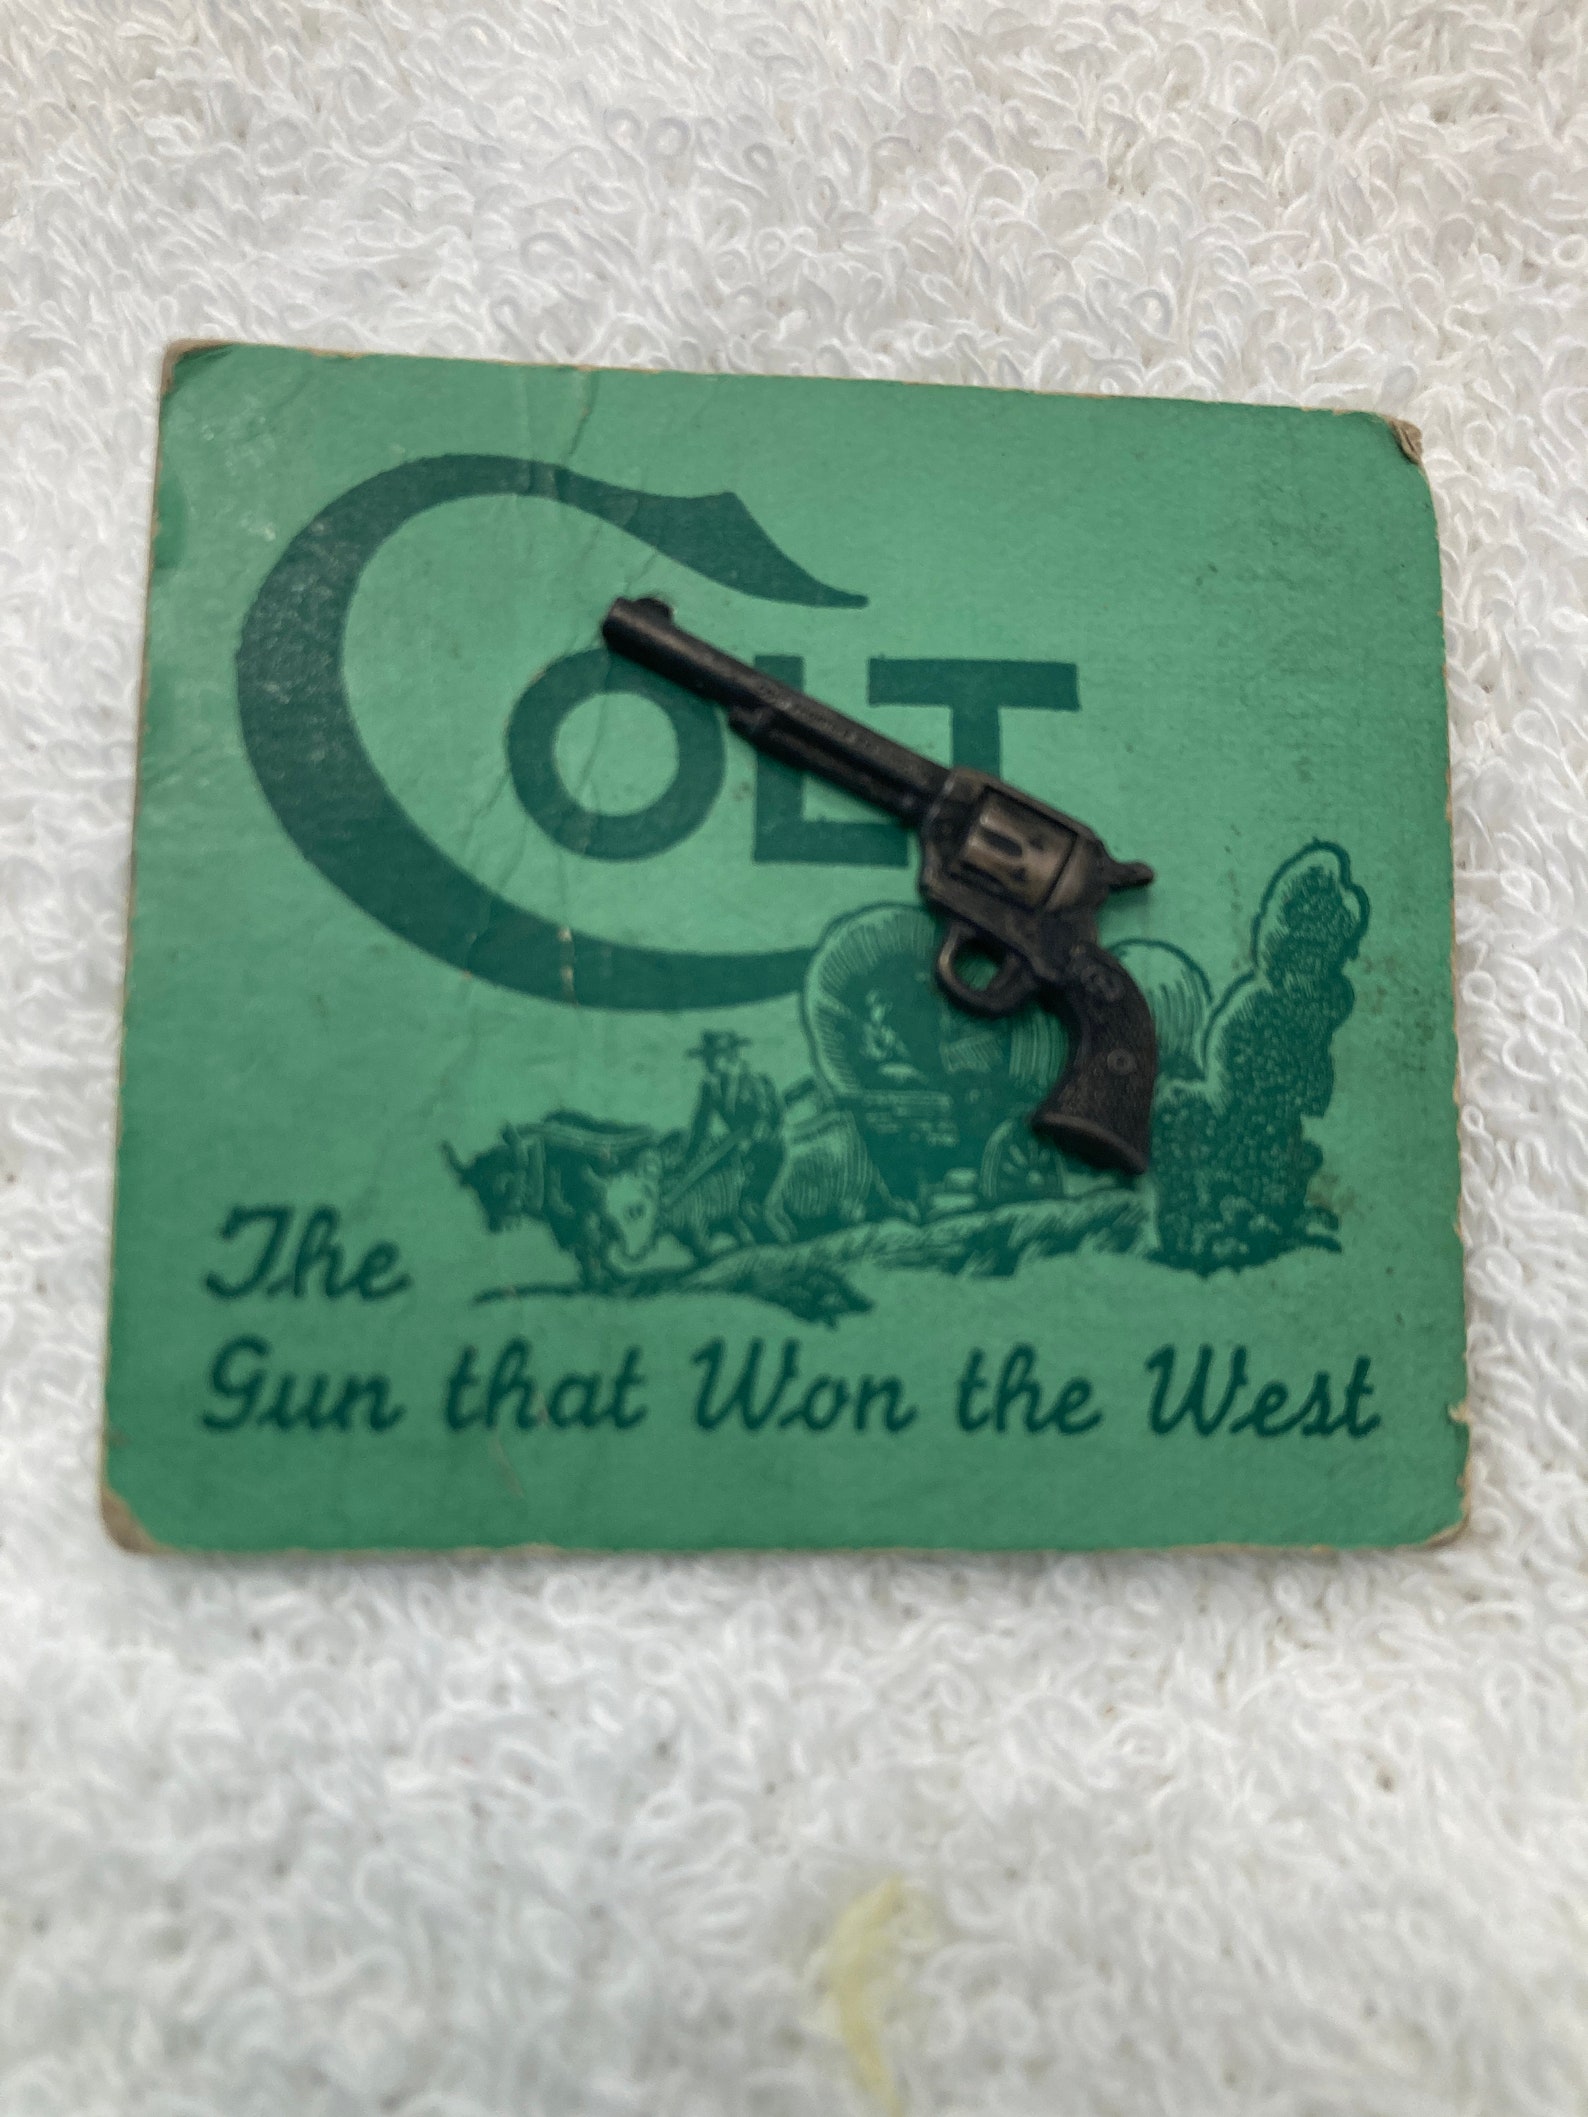 Vintage Miniature Colt Gun Pin With Colt Firearm On Barrel And Etsy